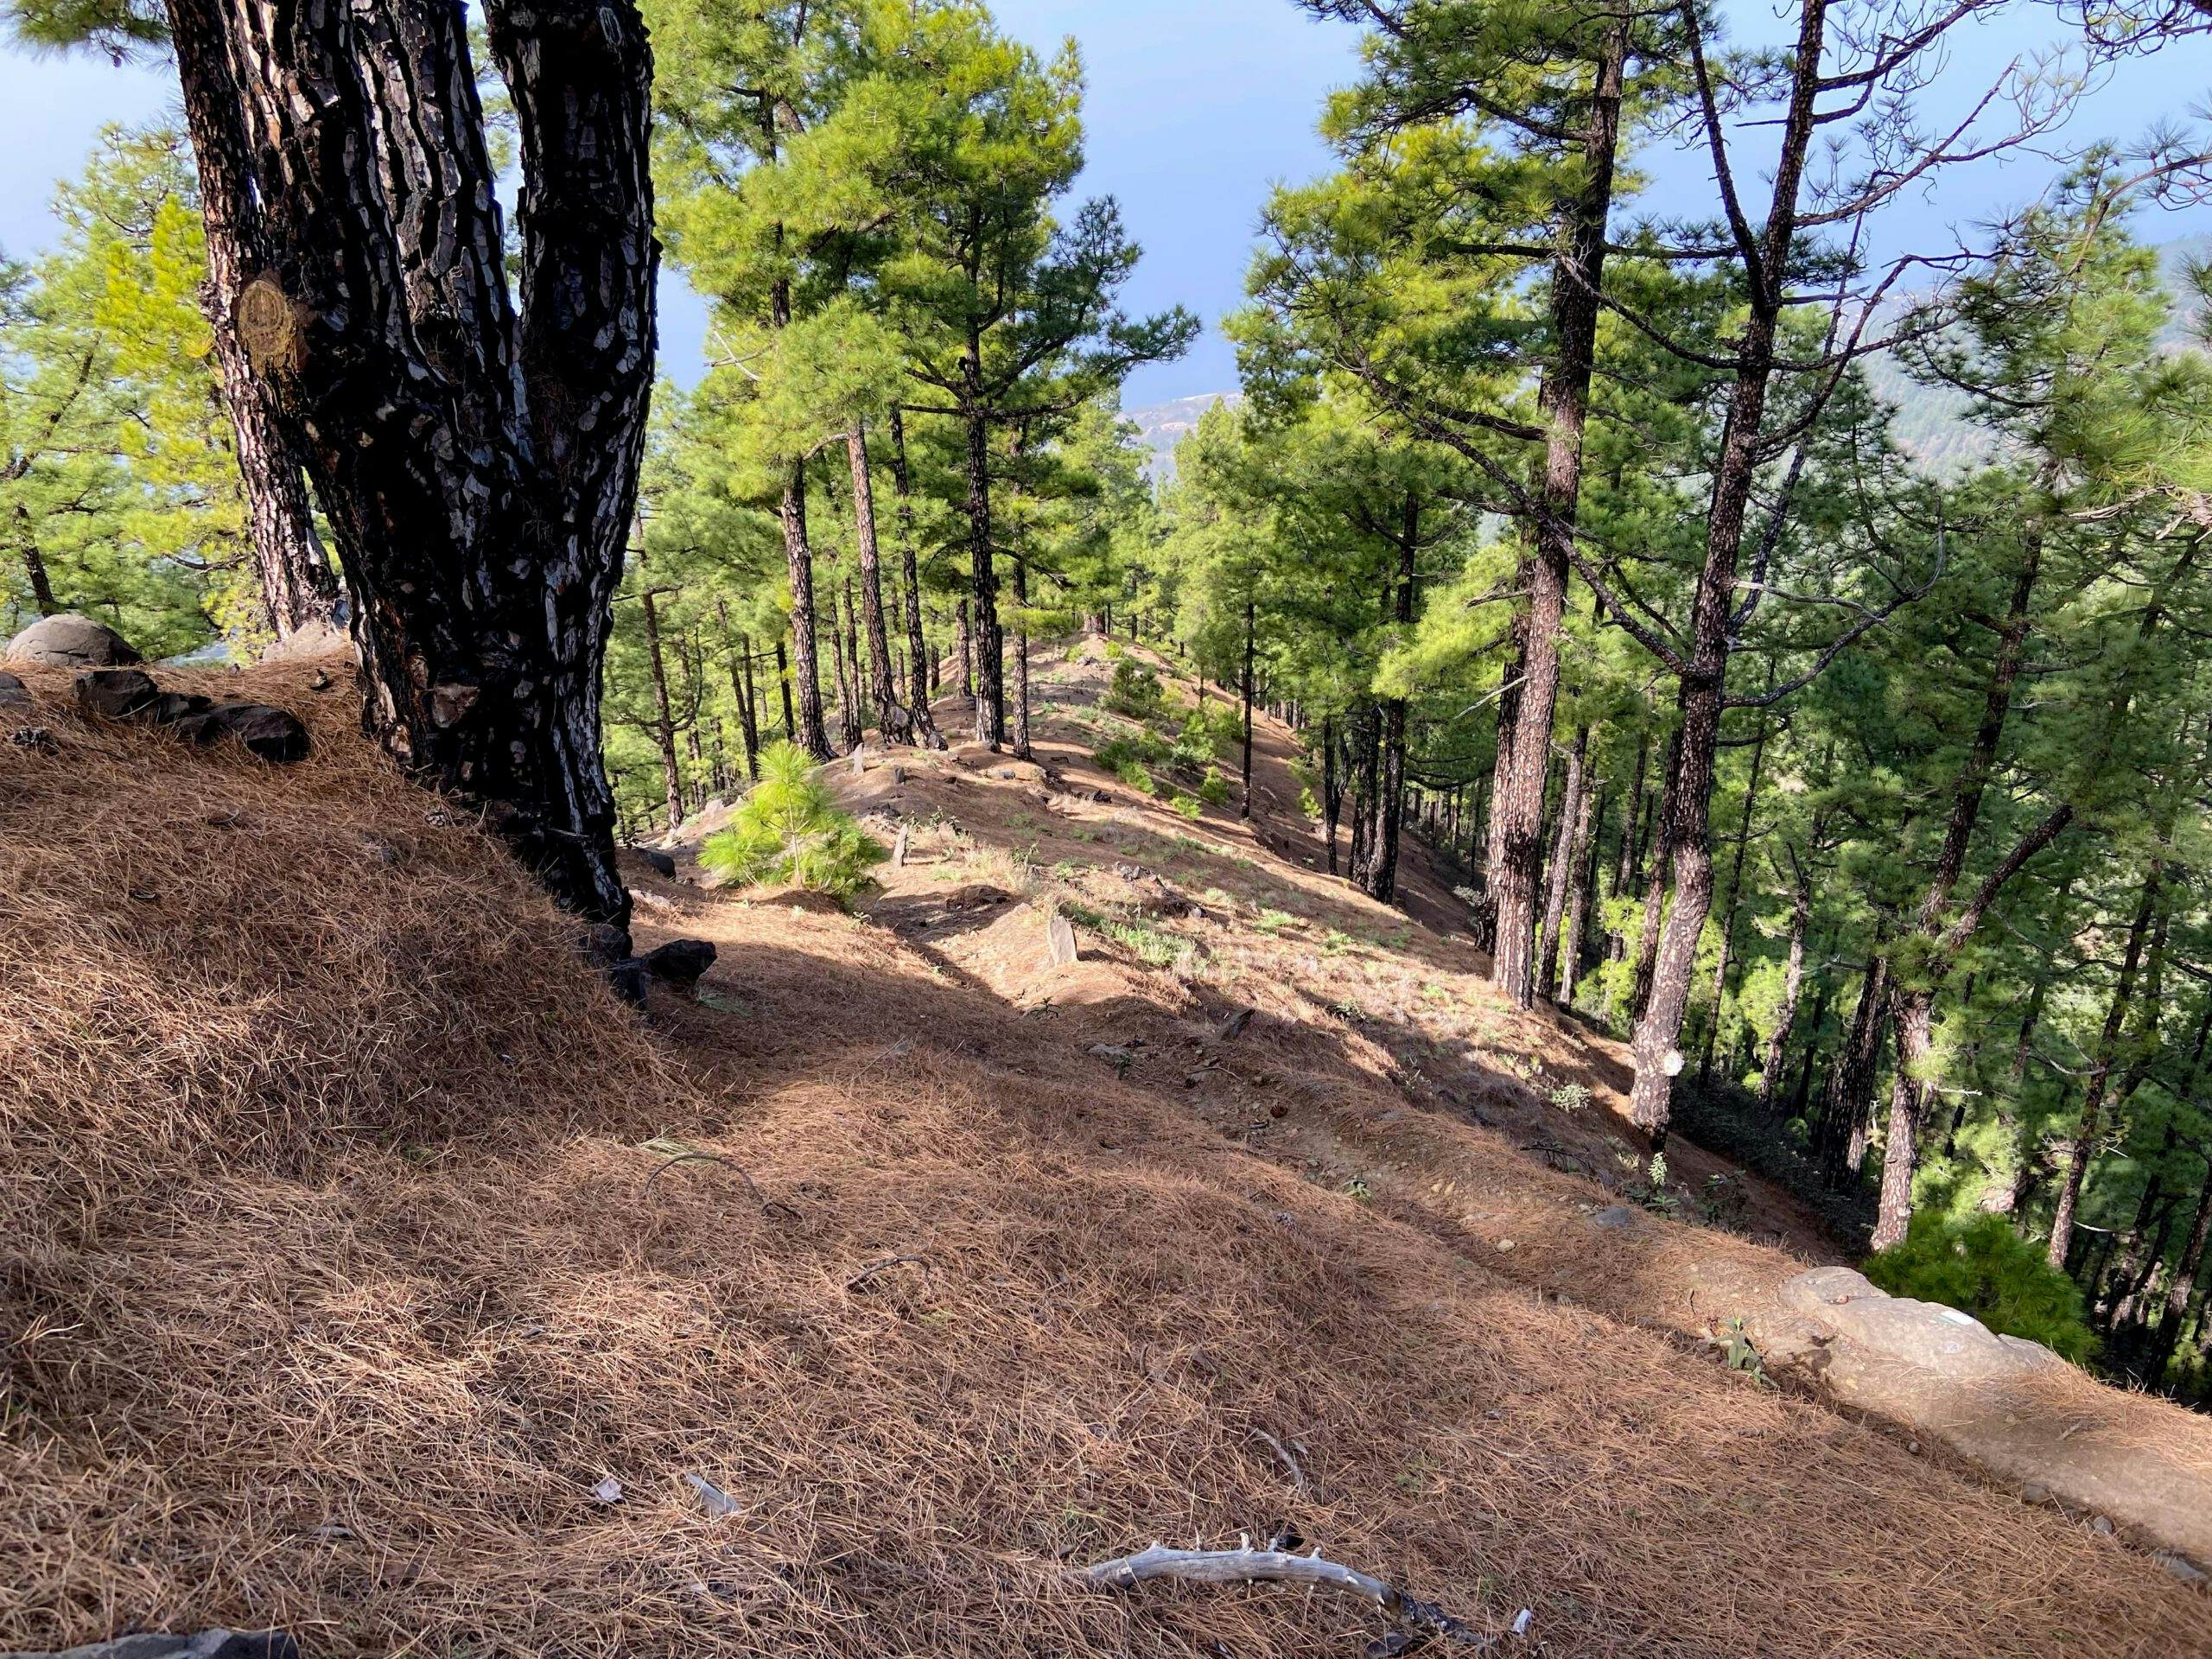 Steep ascent path through the forest towards the caldera rim